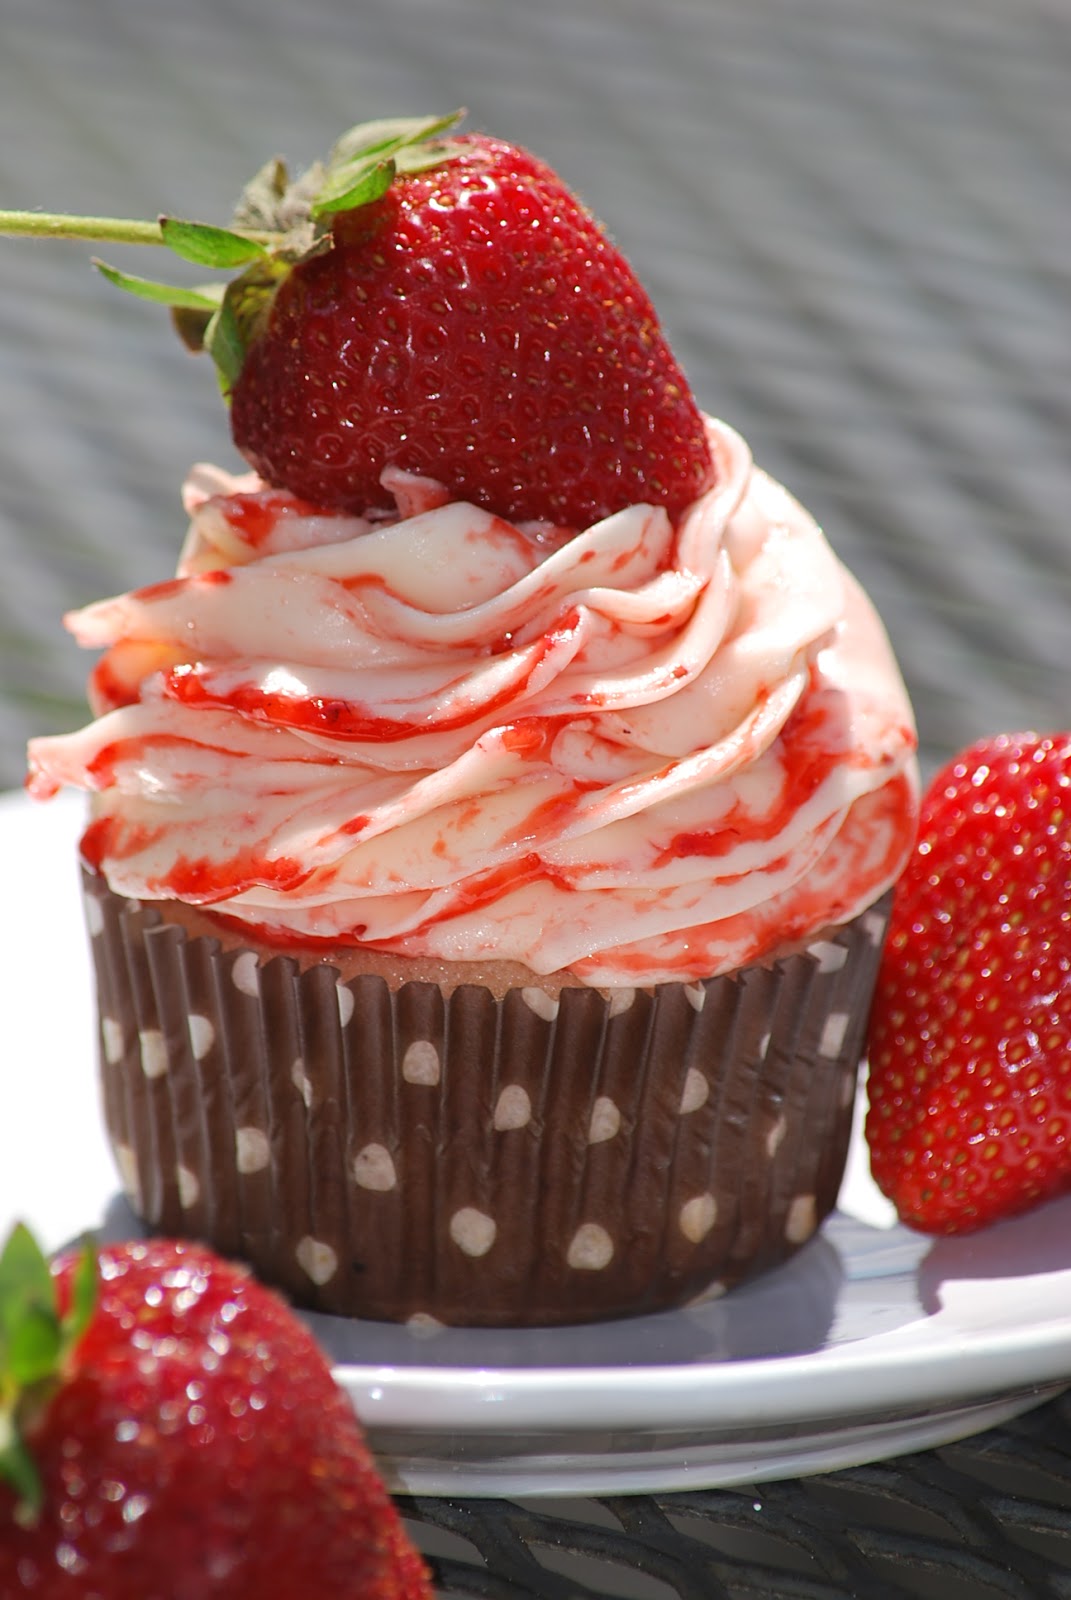 My story in recipes: Strawberry Cupcakes